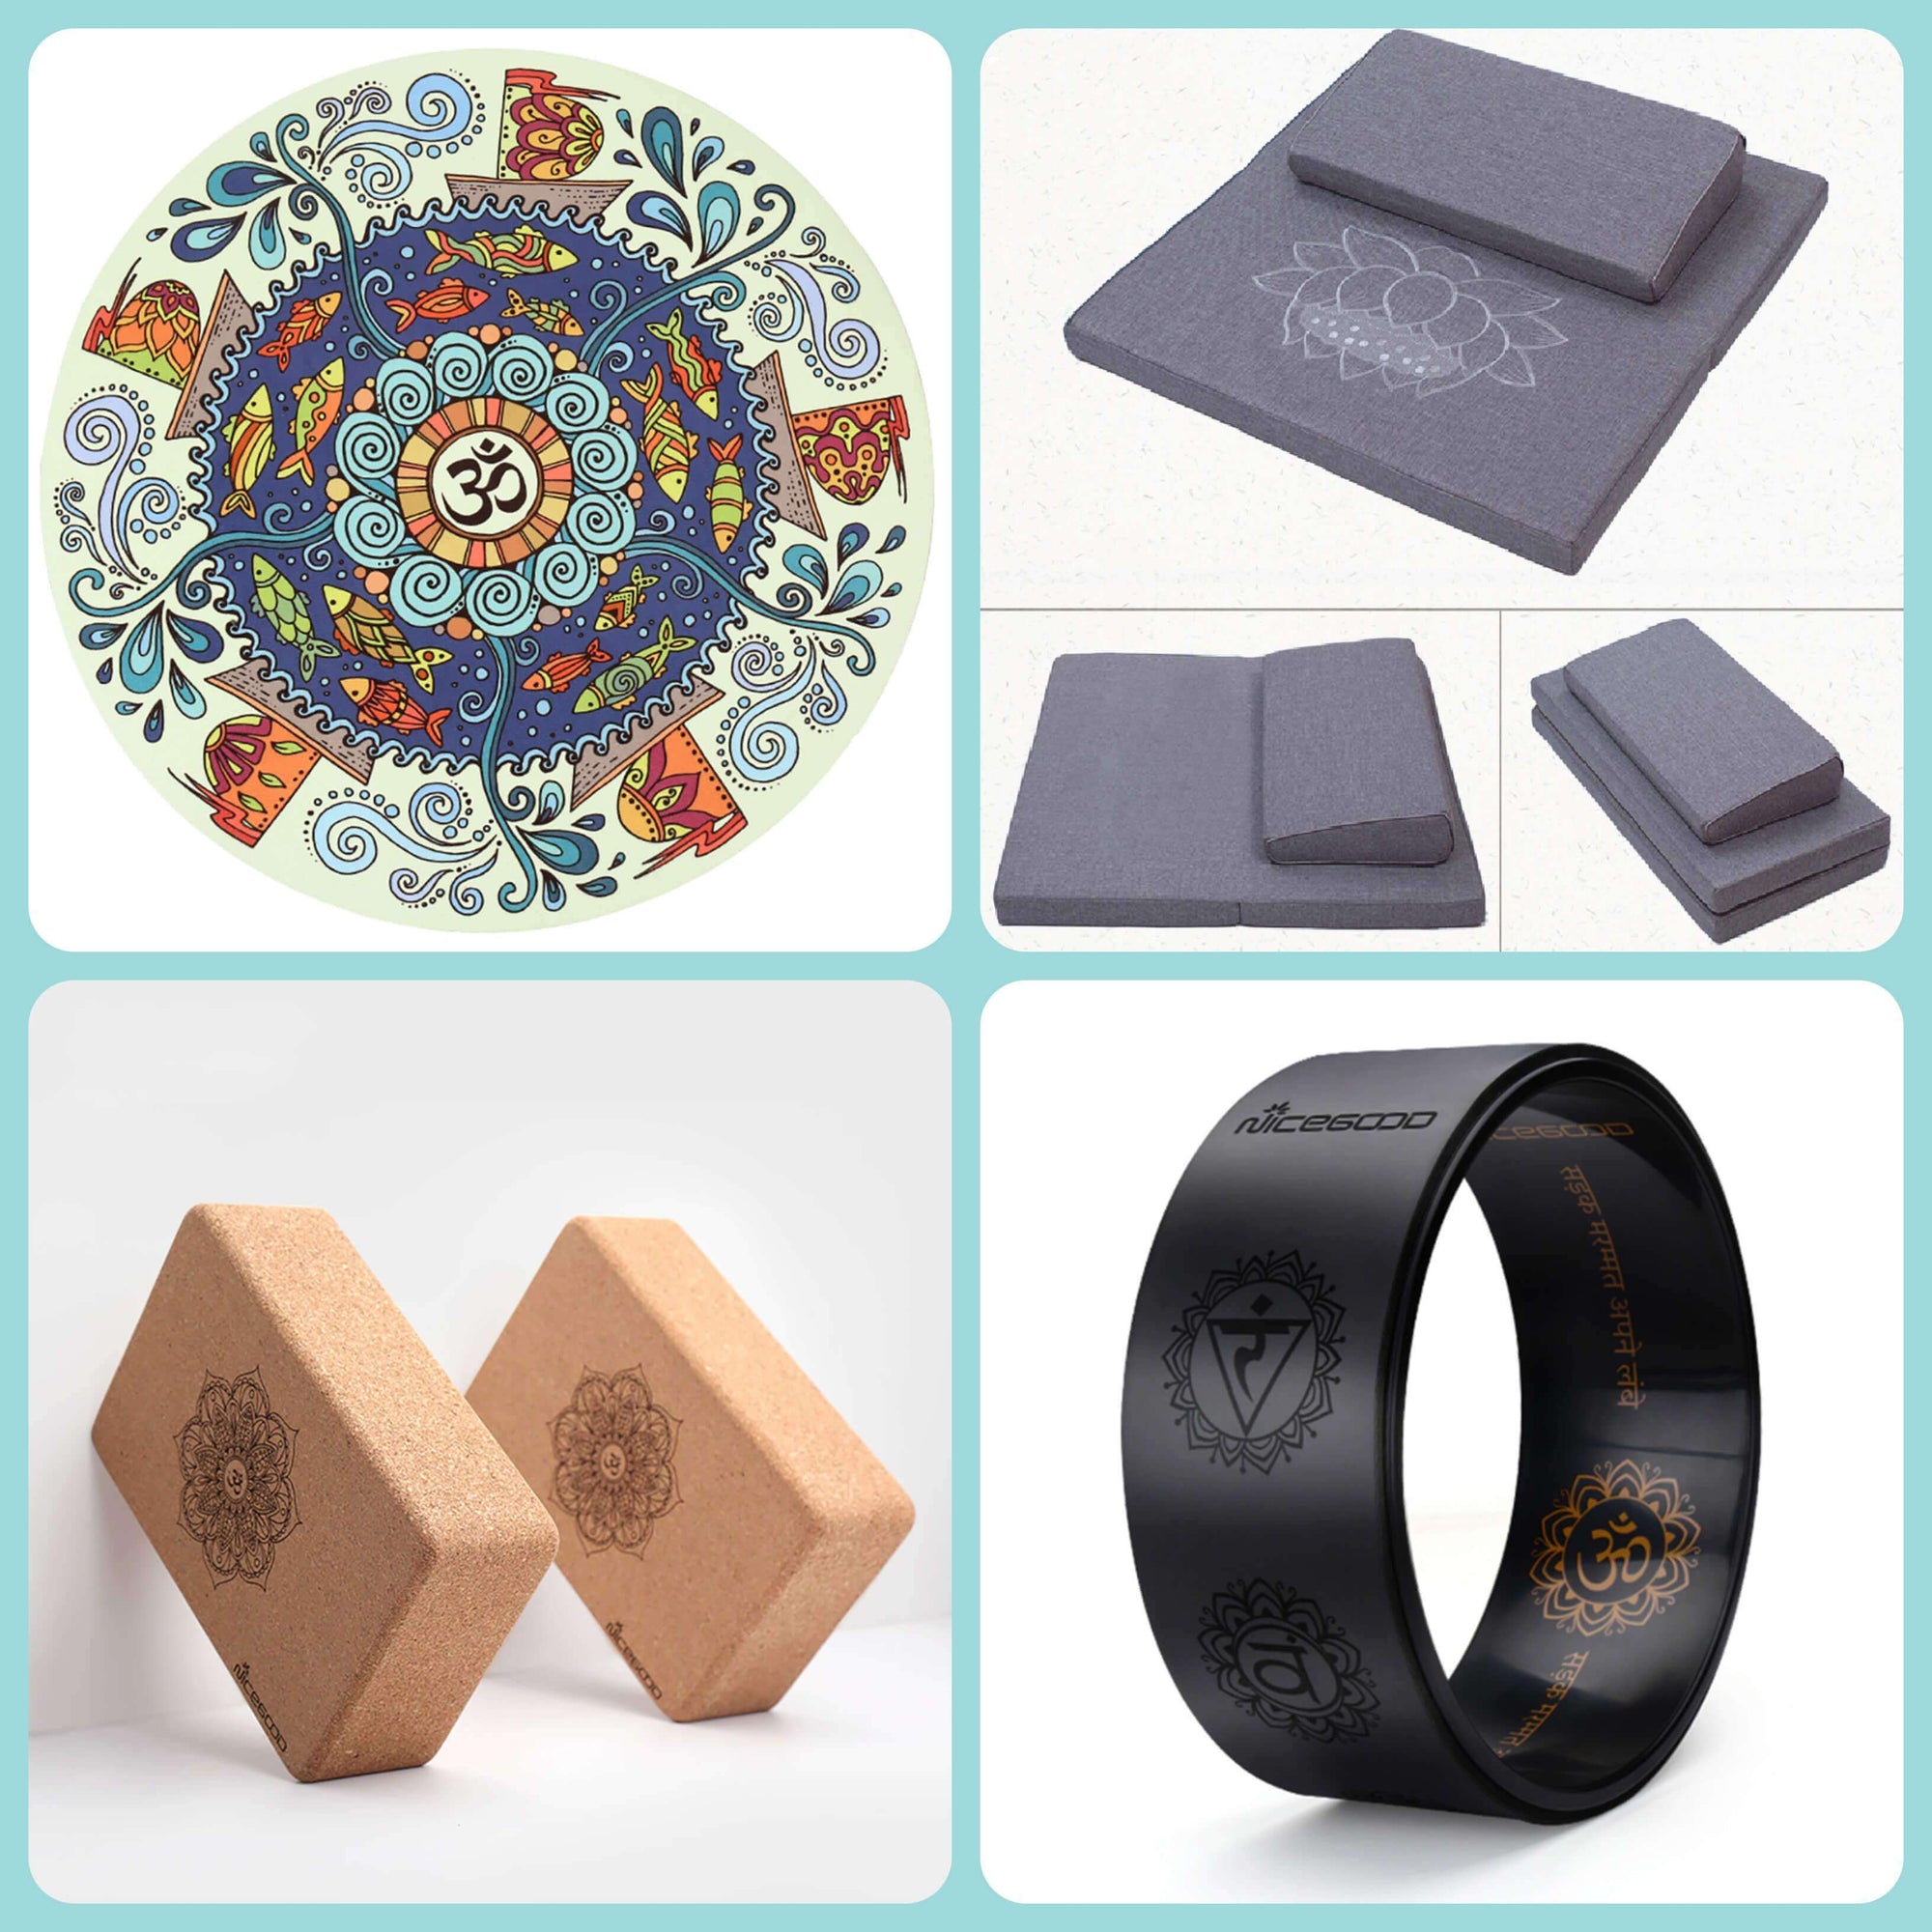 Yoga and meditation accessories